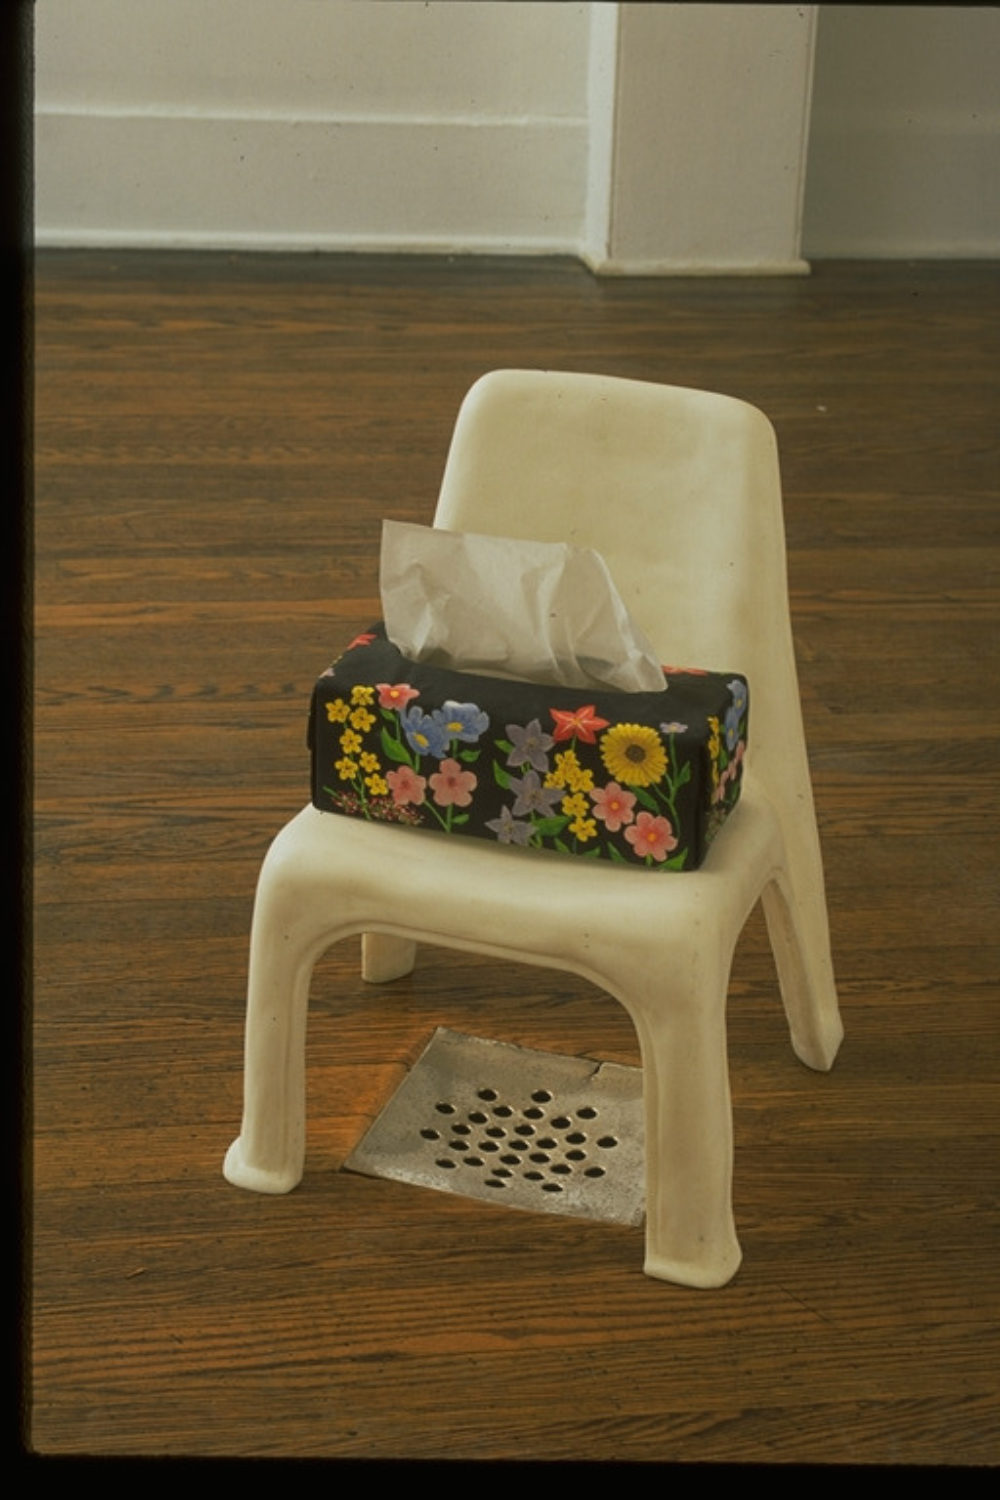 A plastic-appearing chair with a handmade tissue box over a drain in the floor